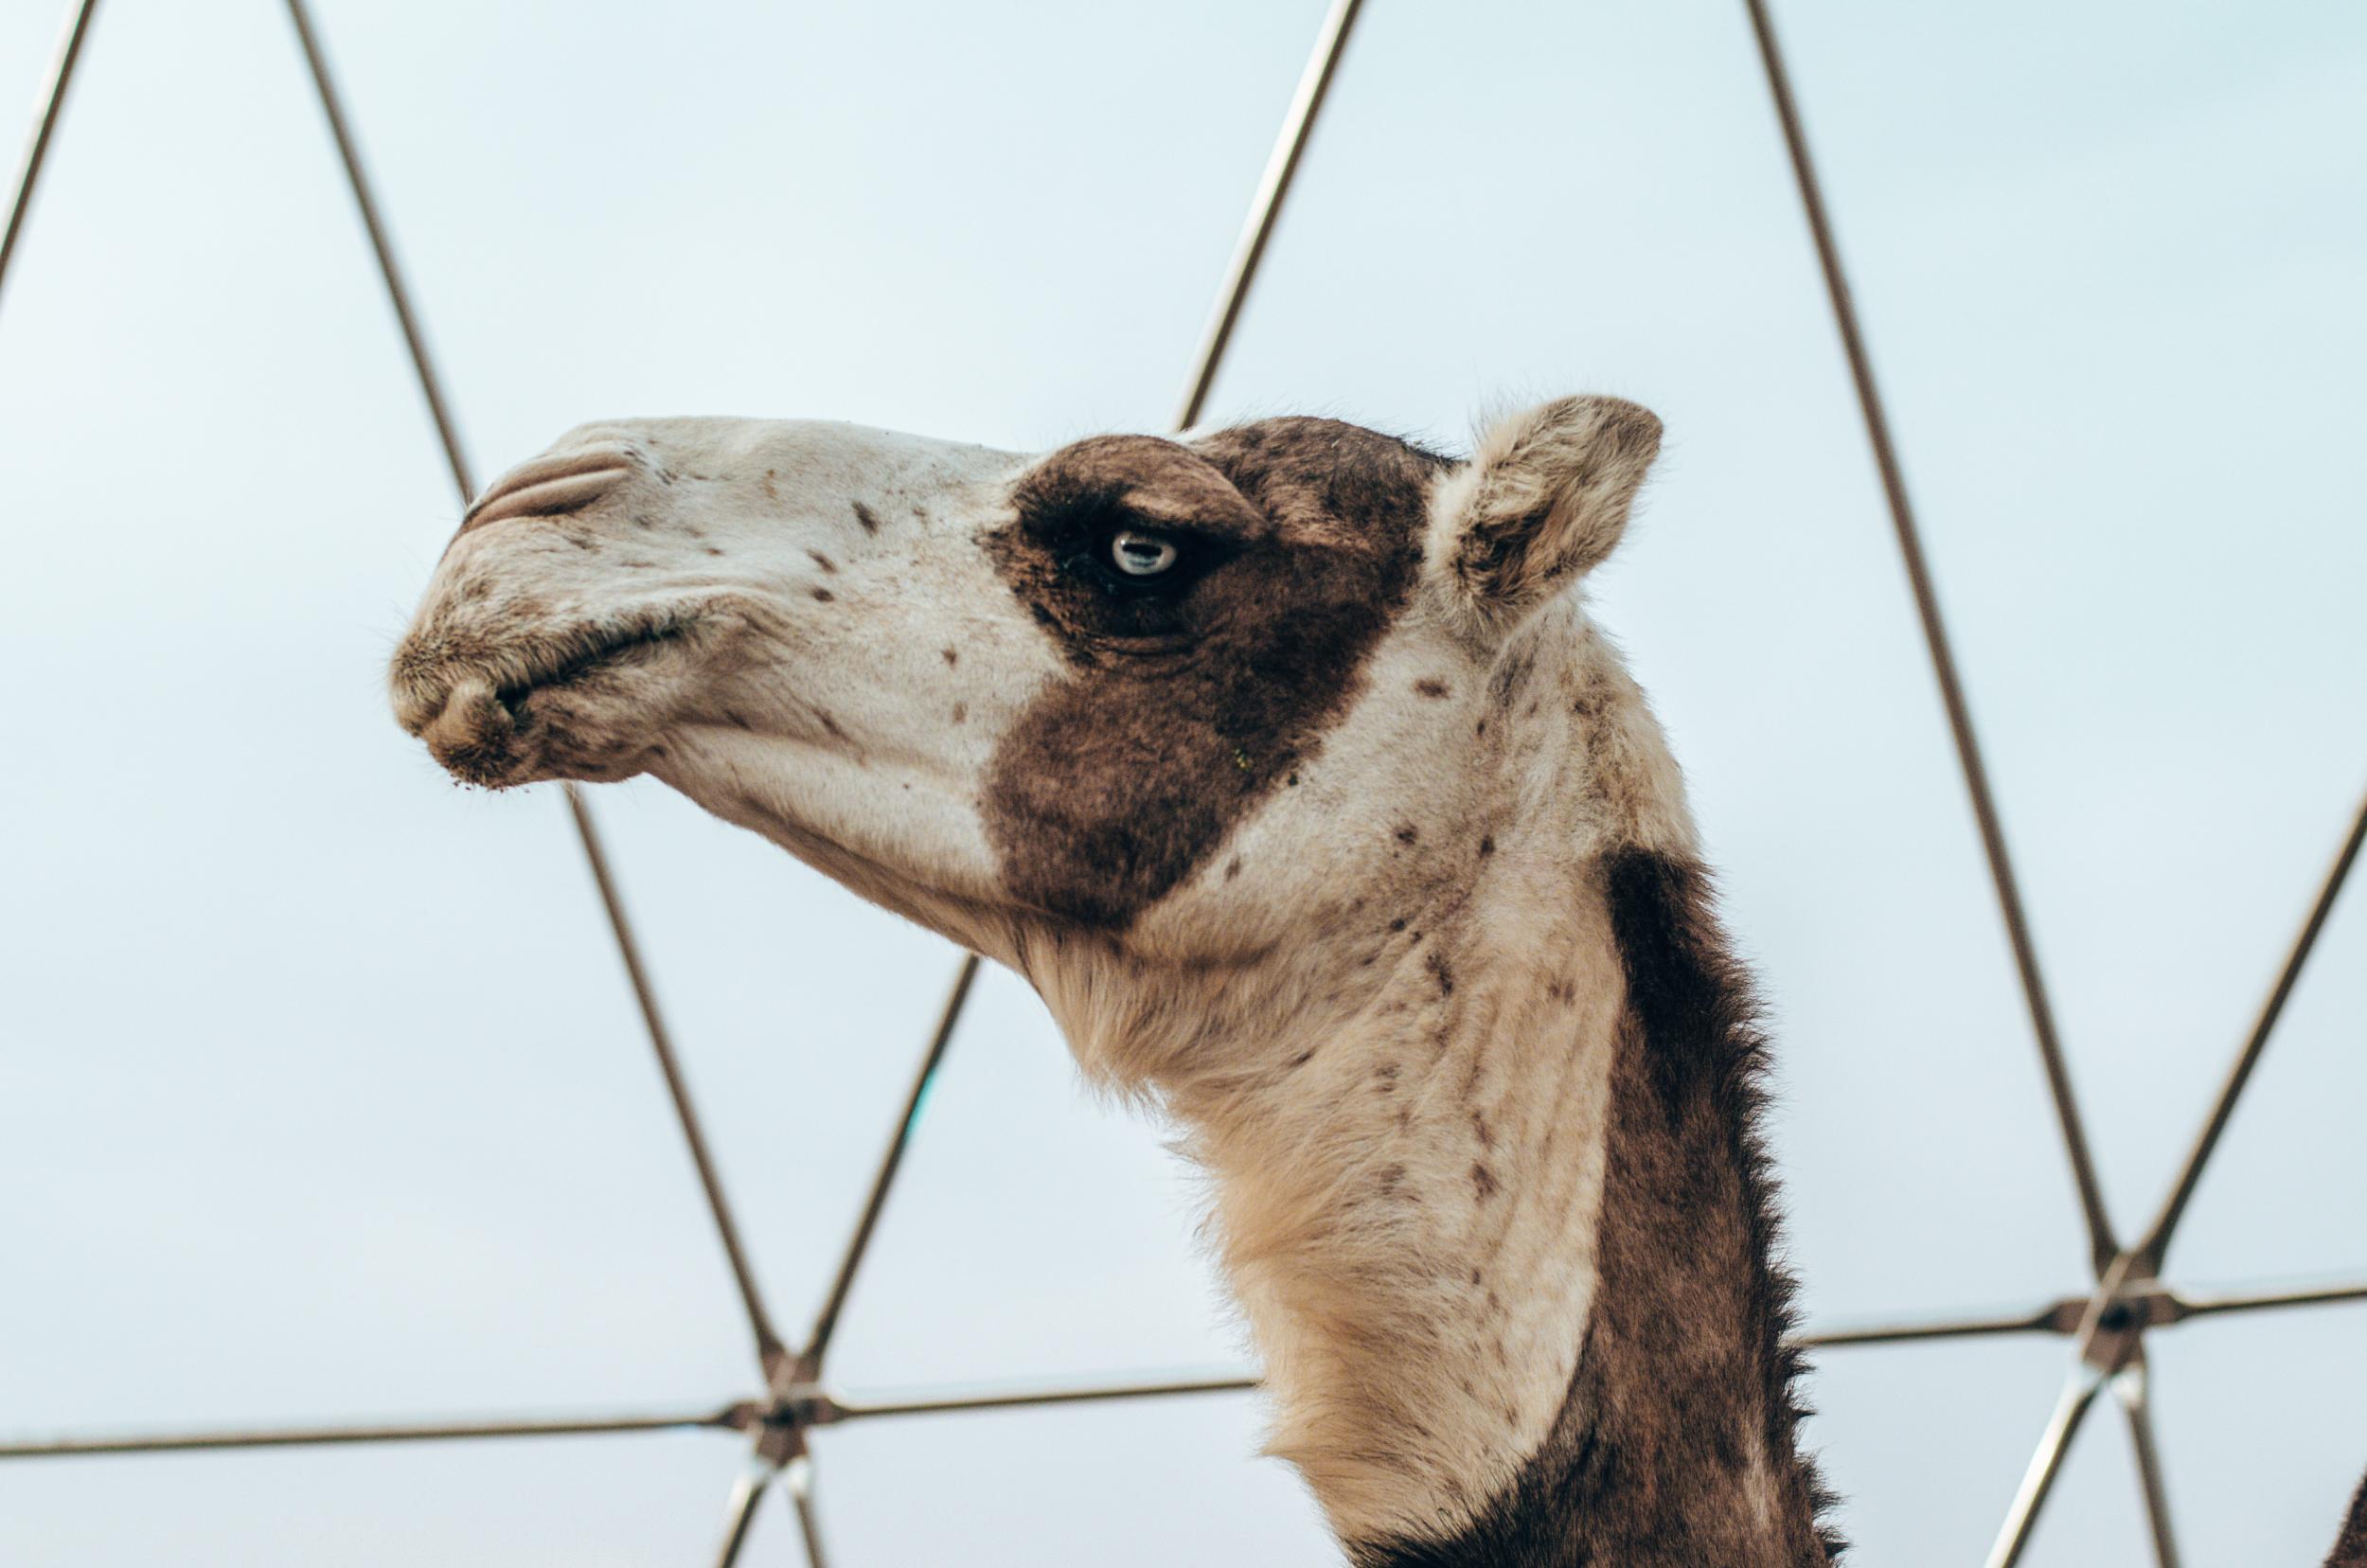 Particularly rare and beautiful camels are kept in a separate enclosure